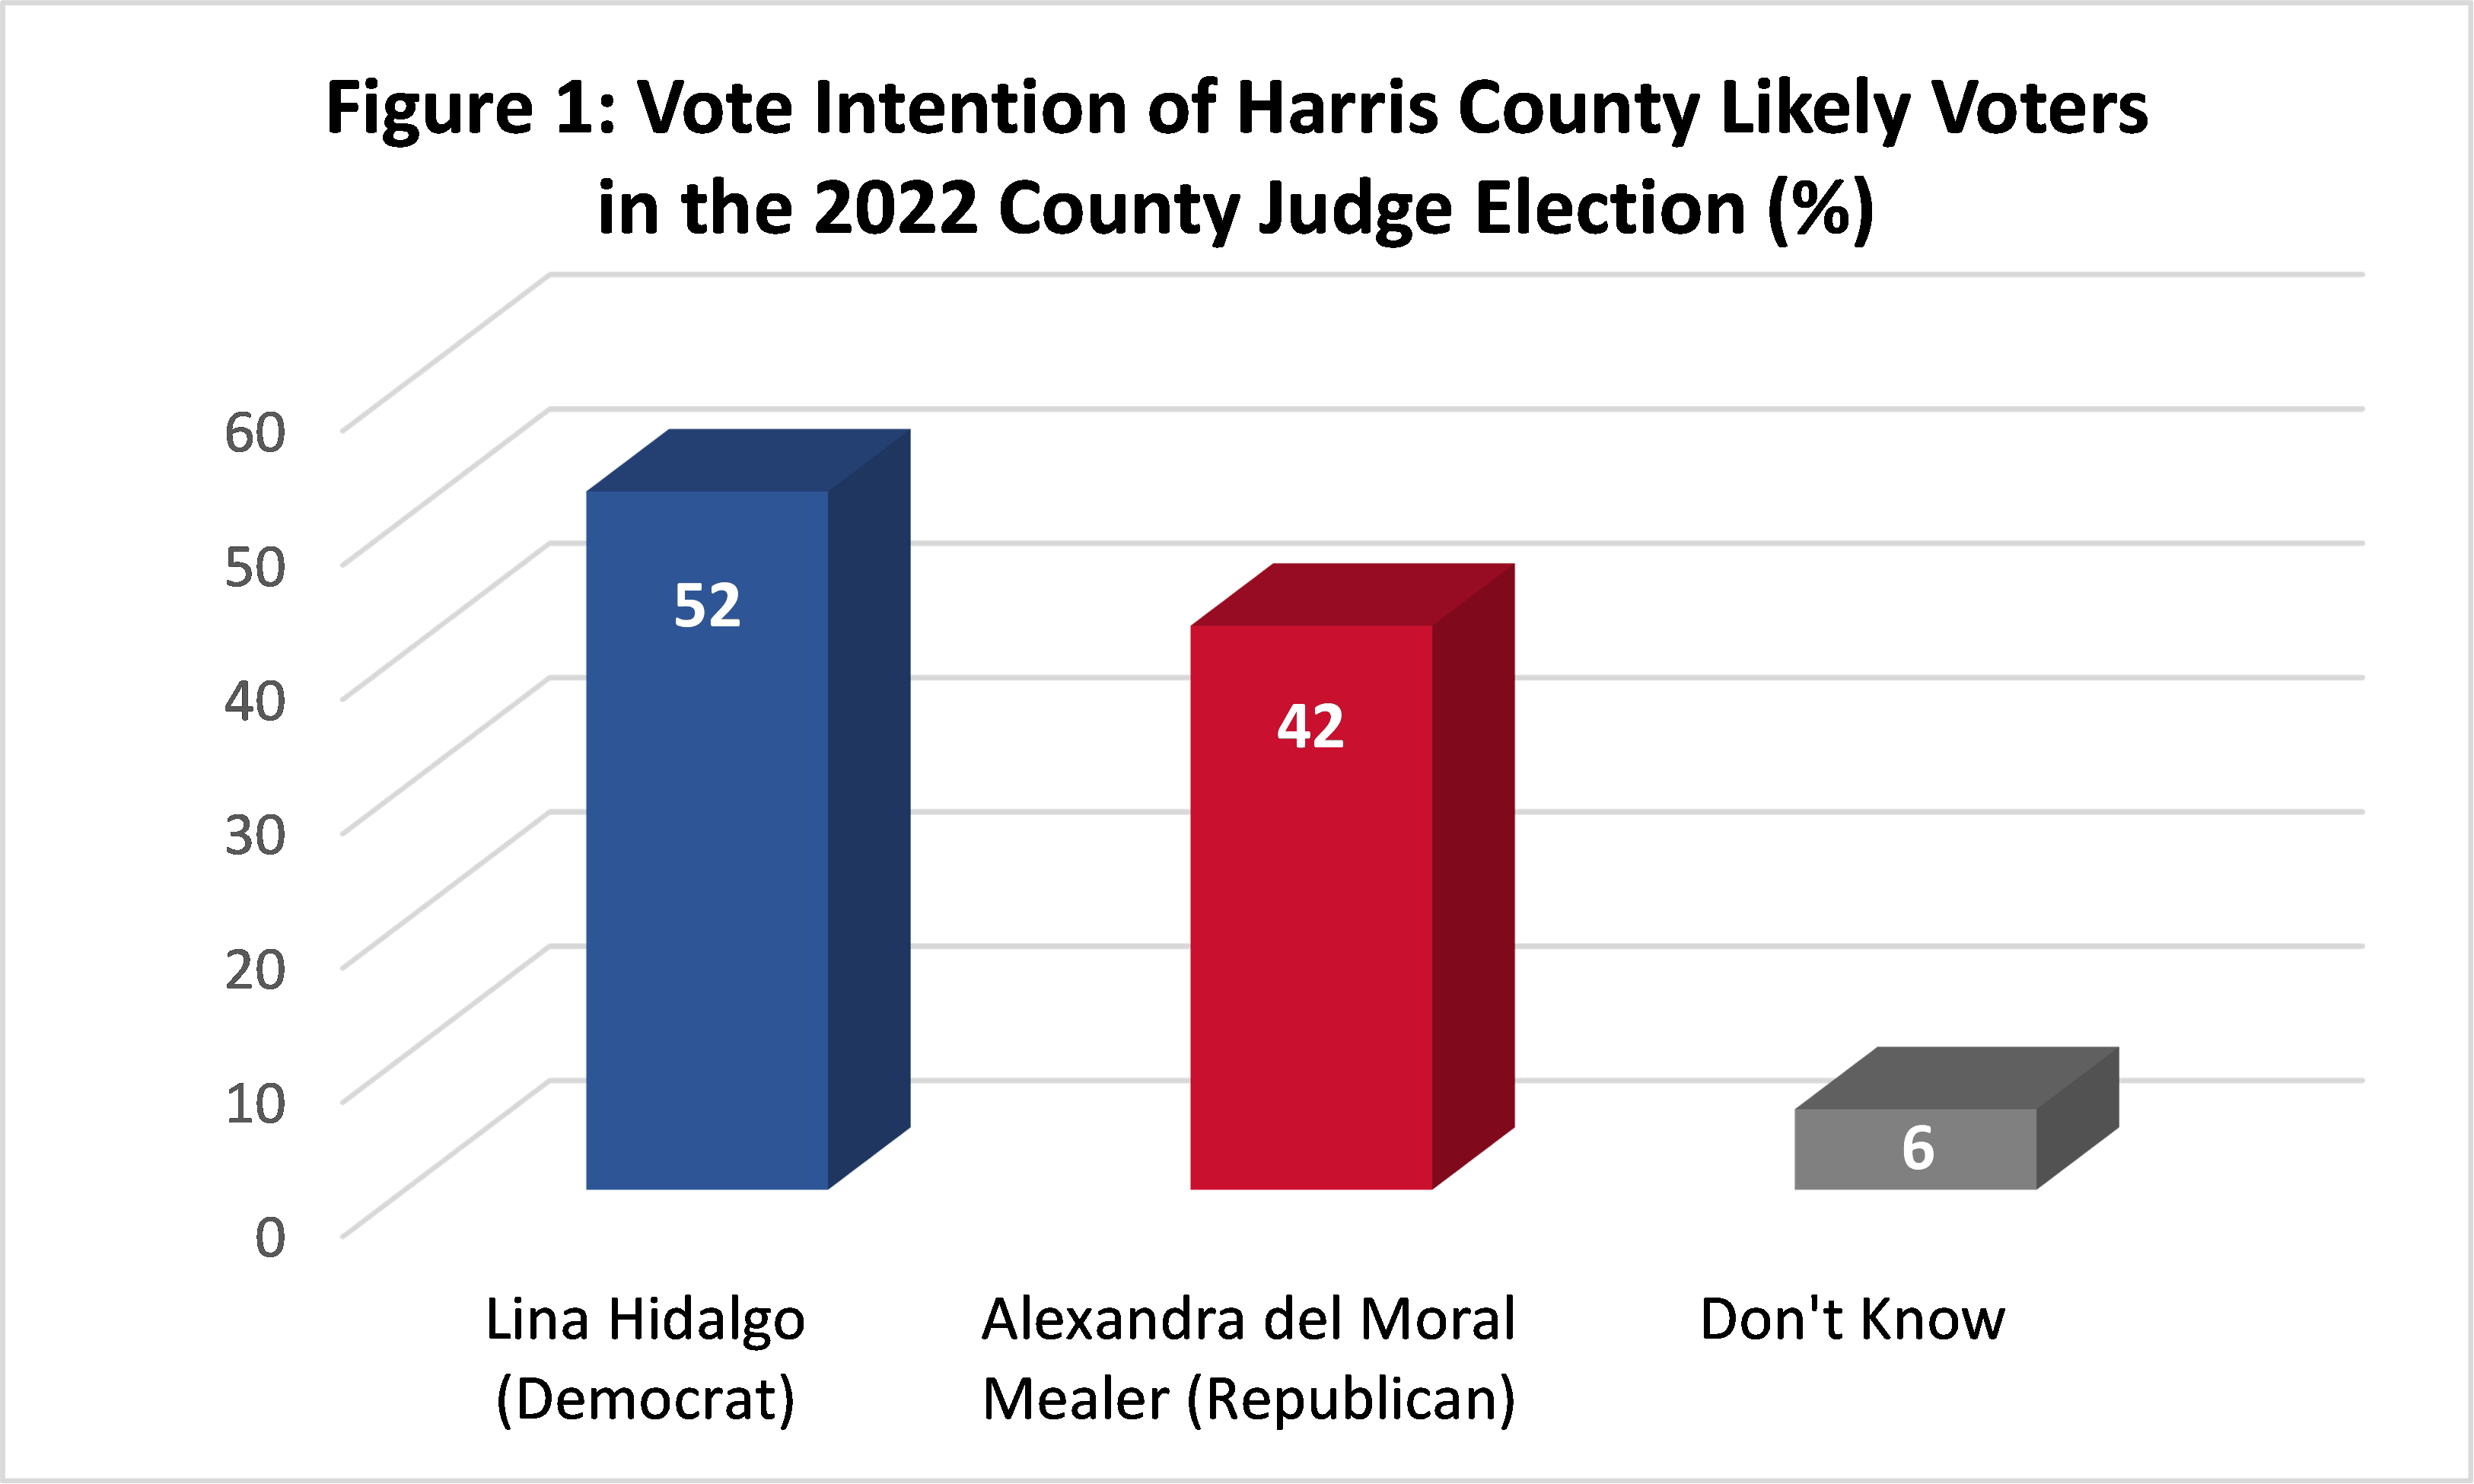 Graphic: vote intention for Harris County likely voters in the 2022 county judge election